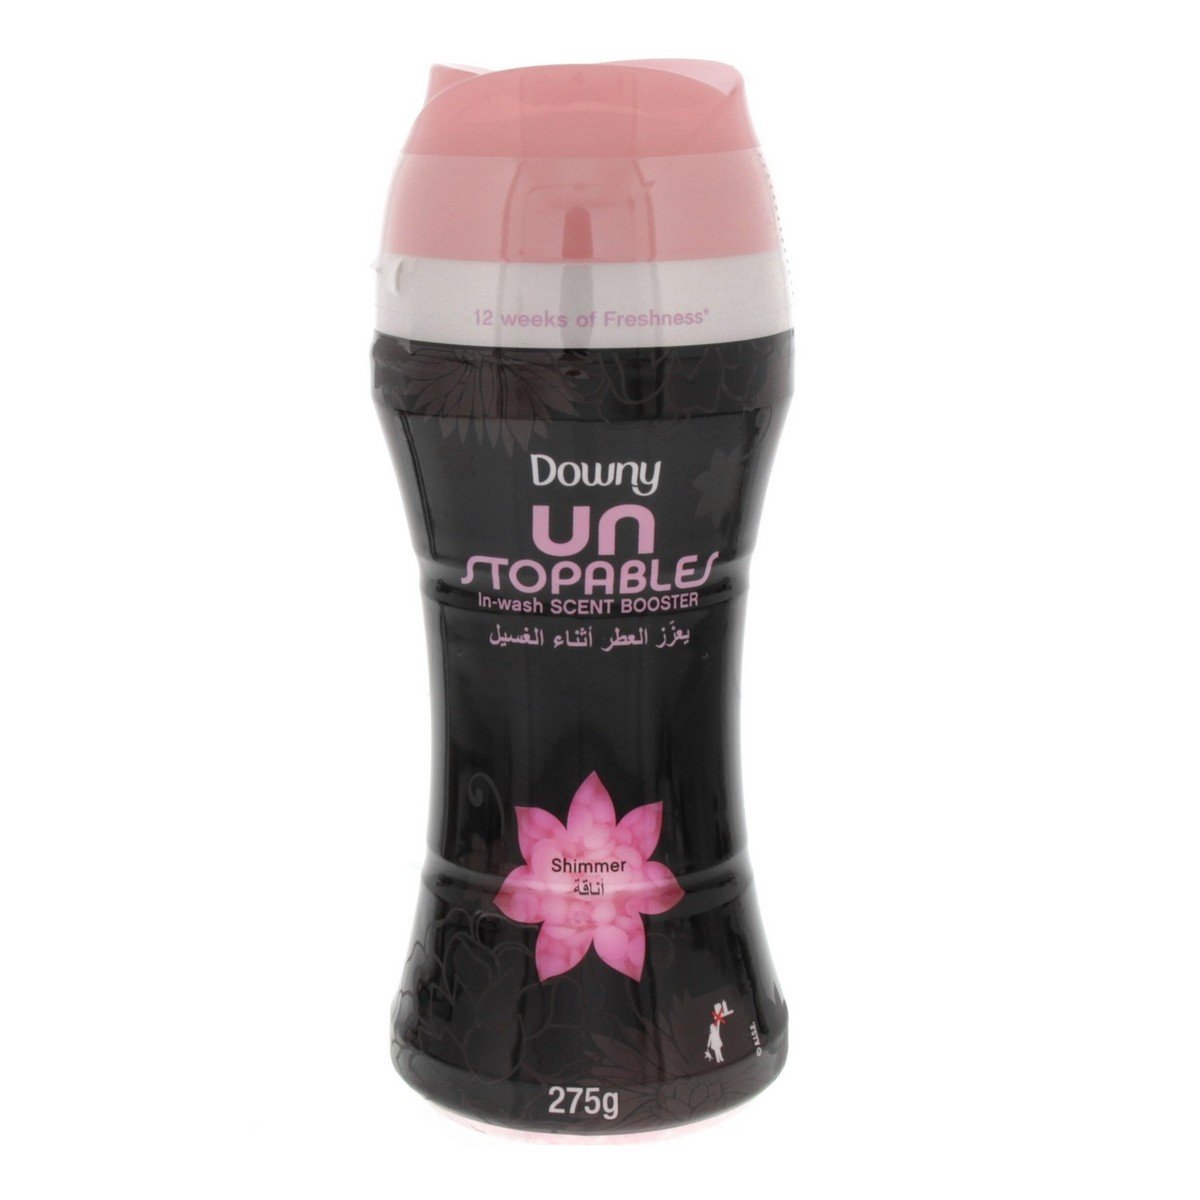 Downy Unstoppables Scent Booster Shimmer 275g